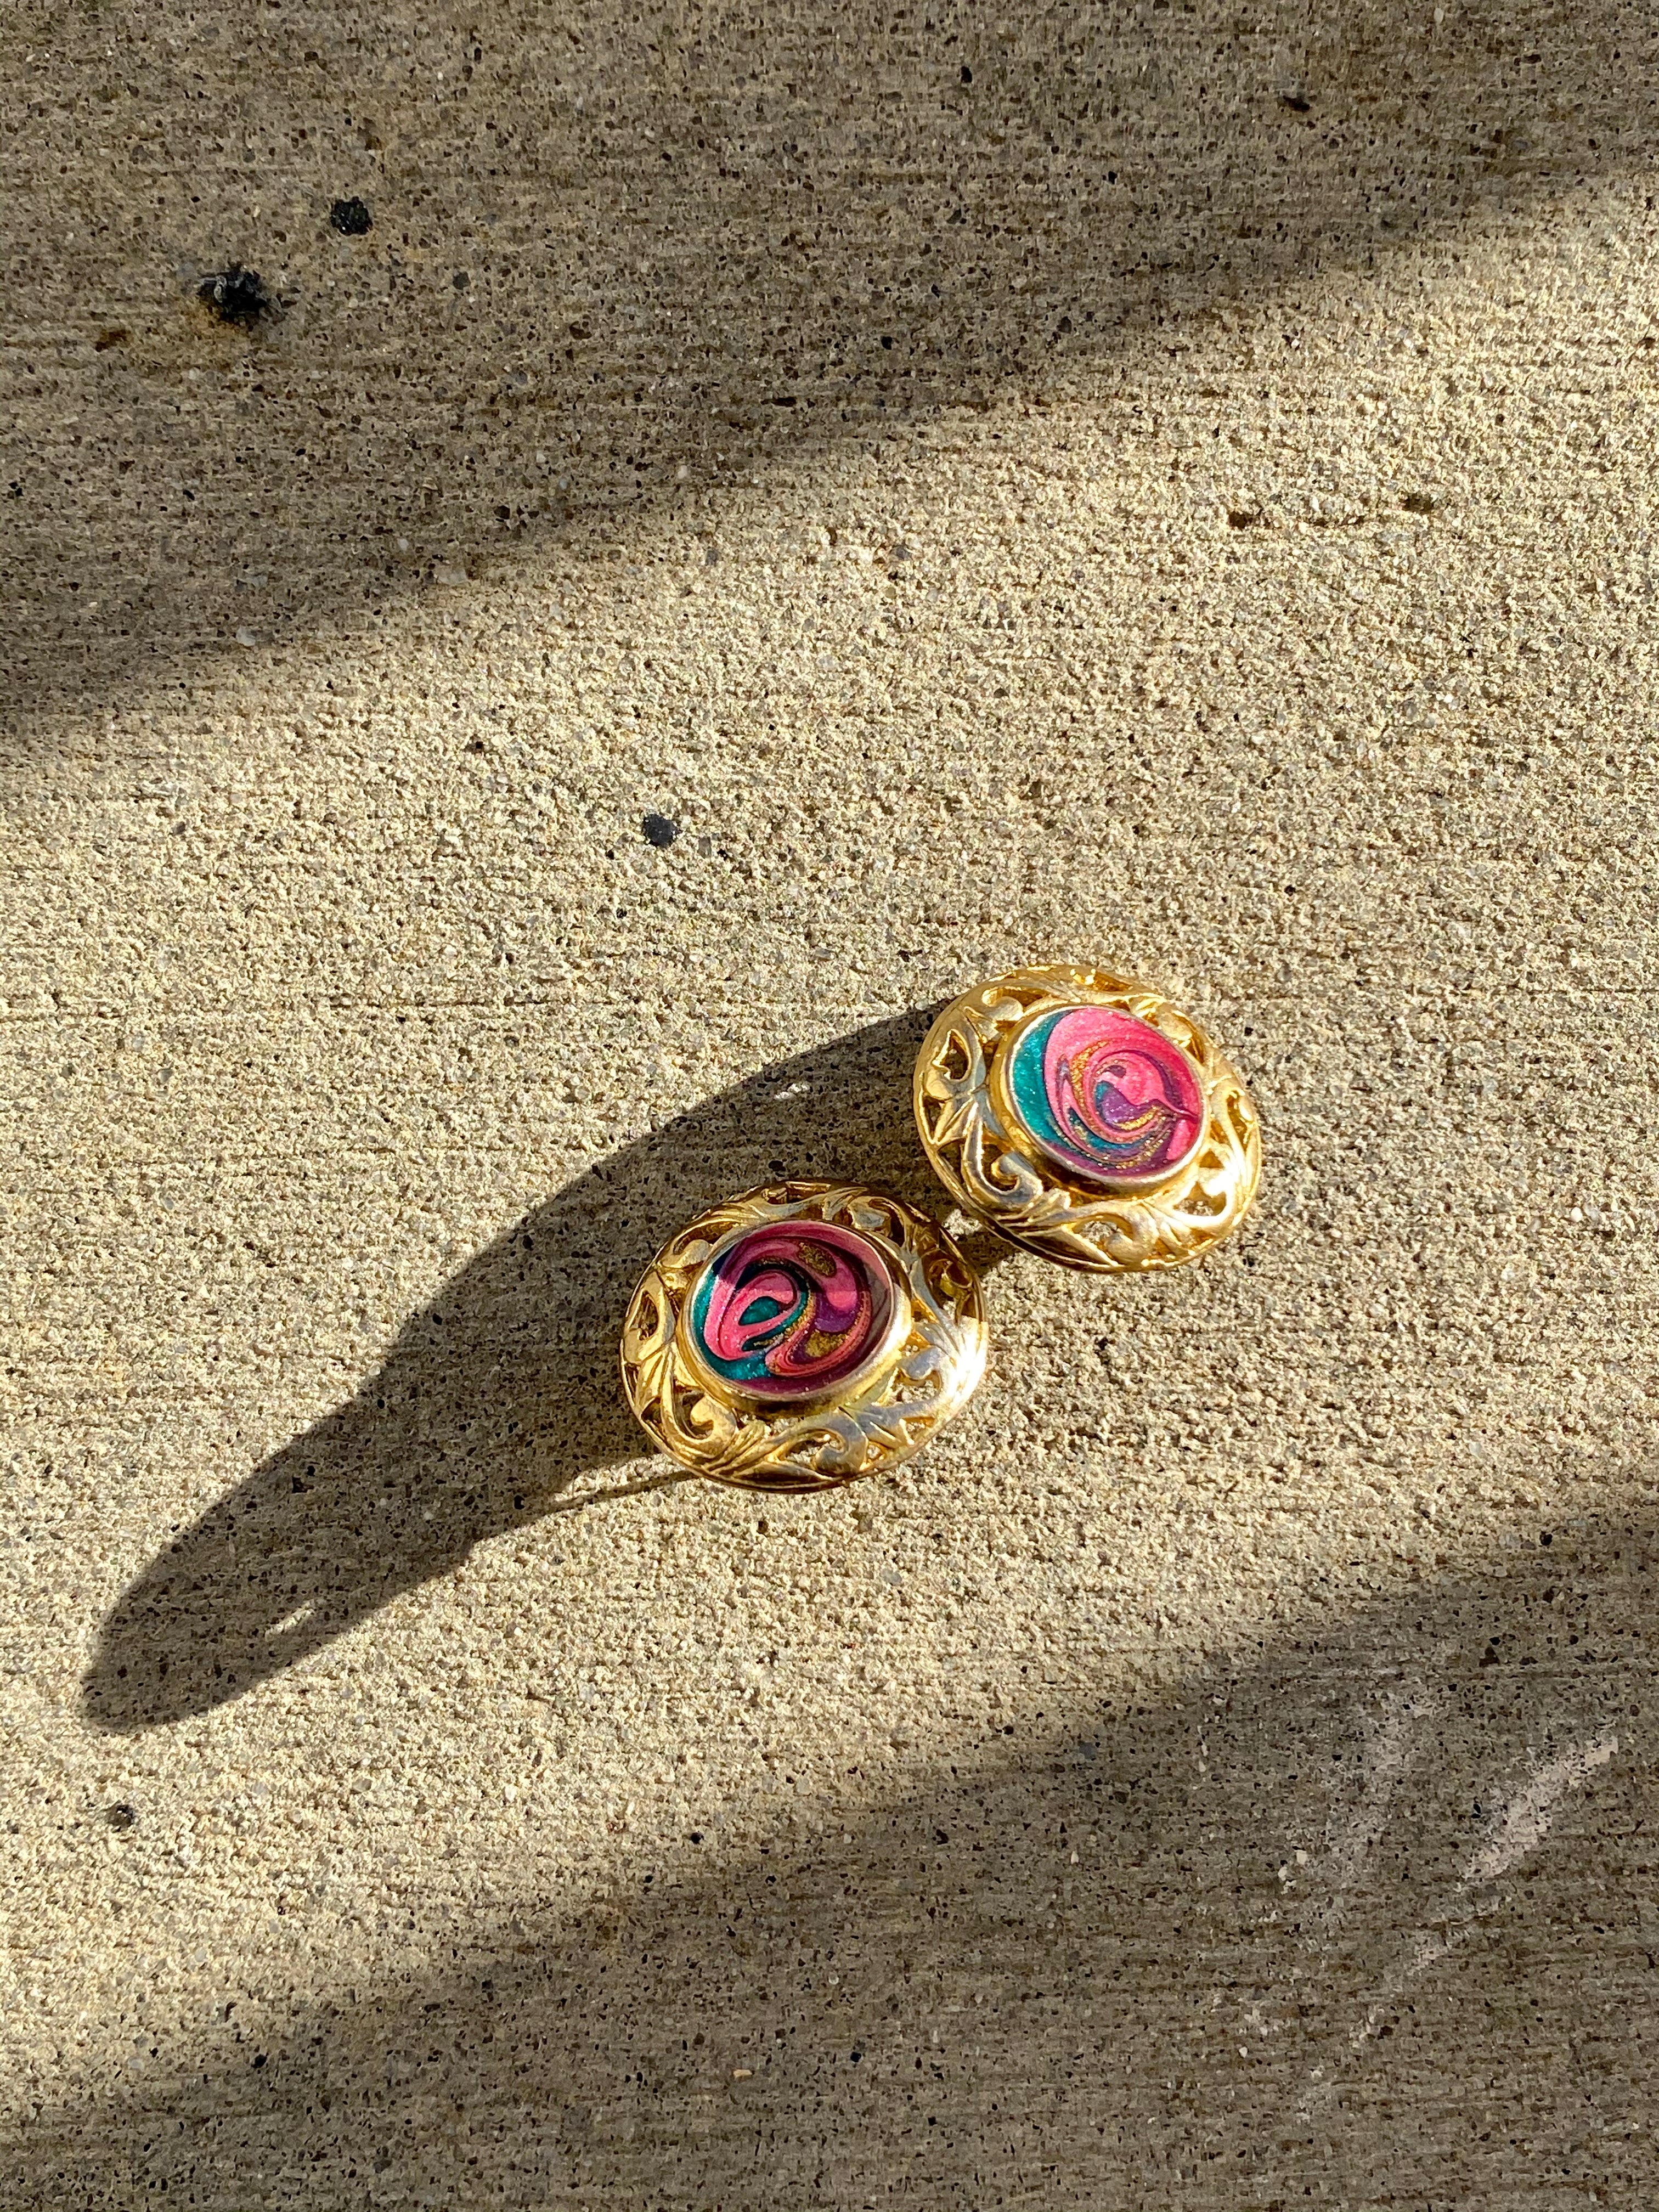 Gold Plated Earrings with carved detail & Colorful Glitter Swirl Finish